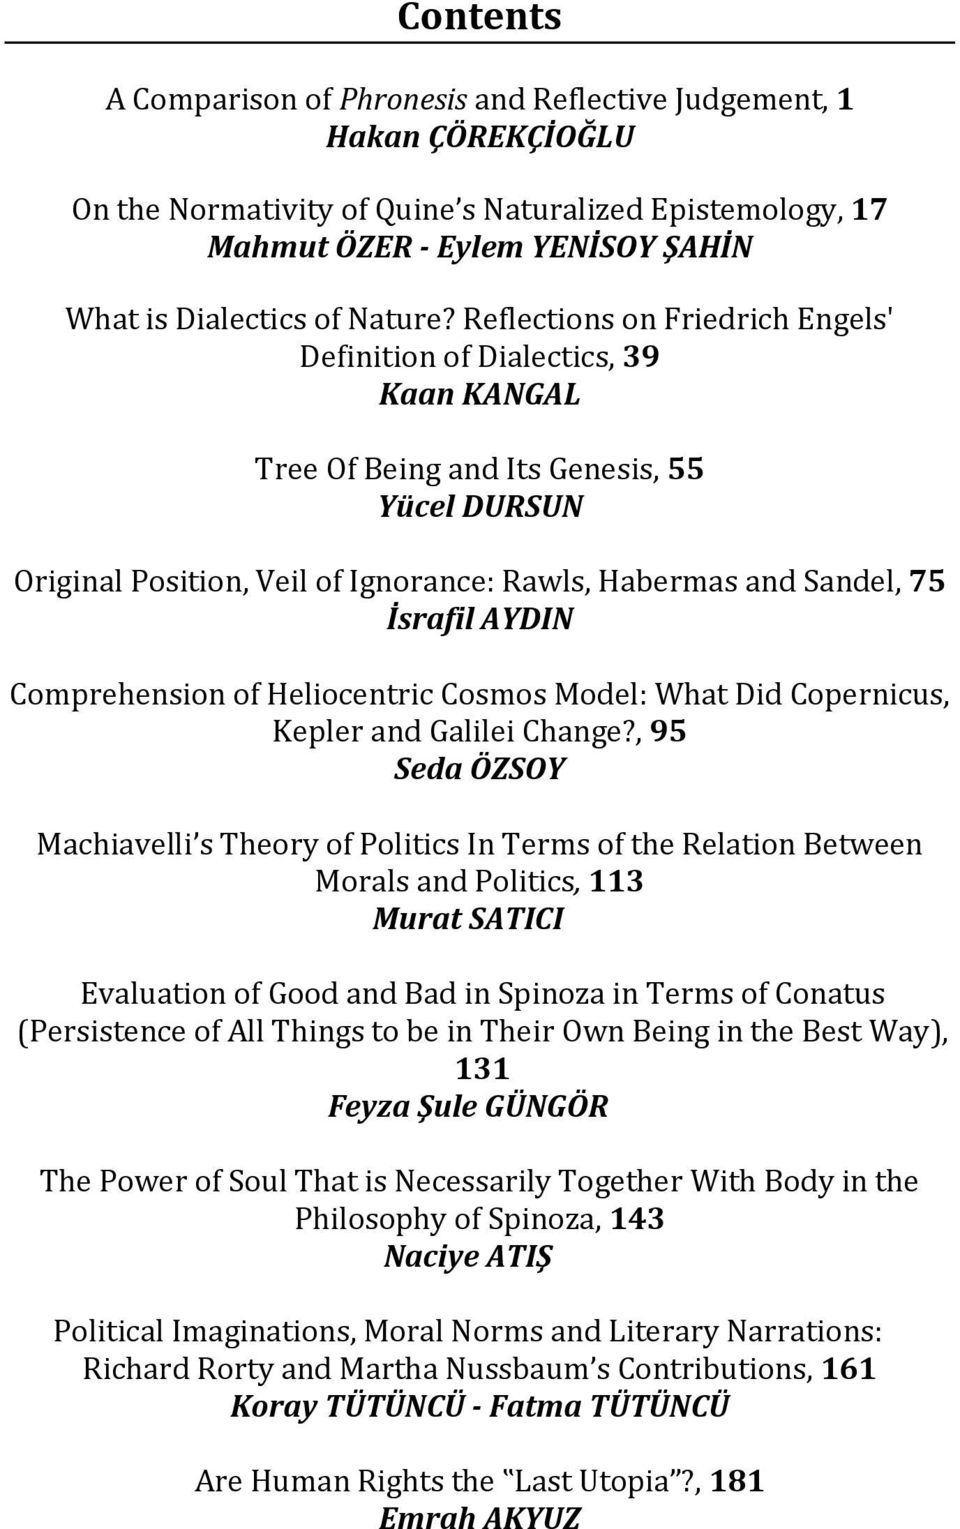 Reflections on Friedrich Engels' Definition of Dialectics, 39 Kaan KANGAL Tree Of Being and Its Genesis, 55 Yücel DURSUN Original Position, Veil of Ignorance: Rawls, Habermas and Sandel, 75 İsrafil